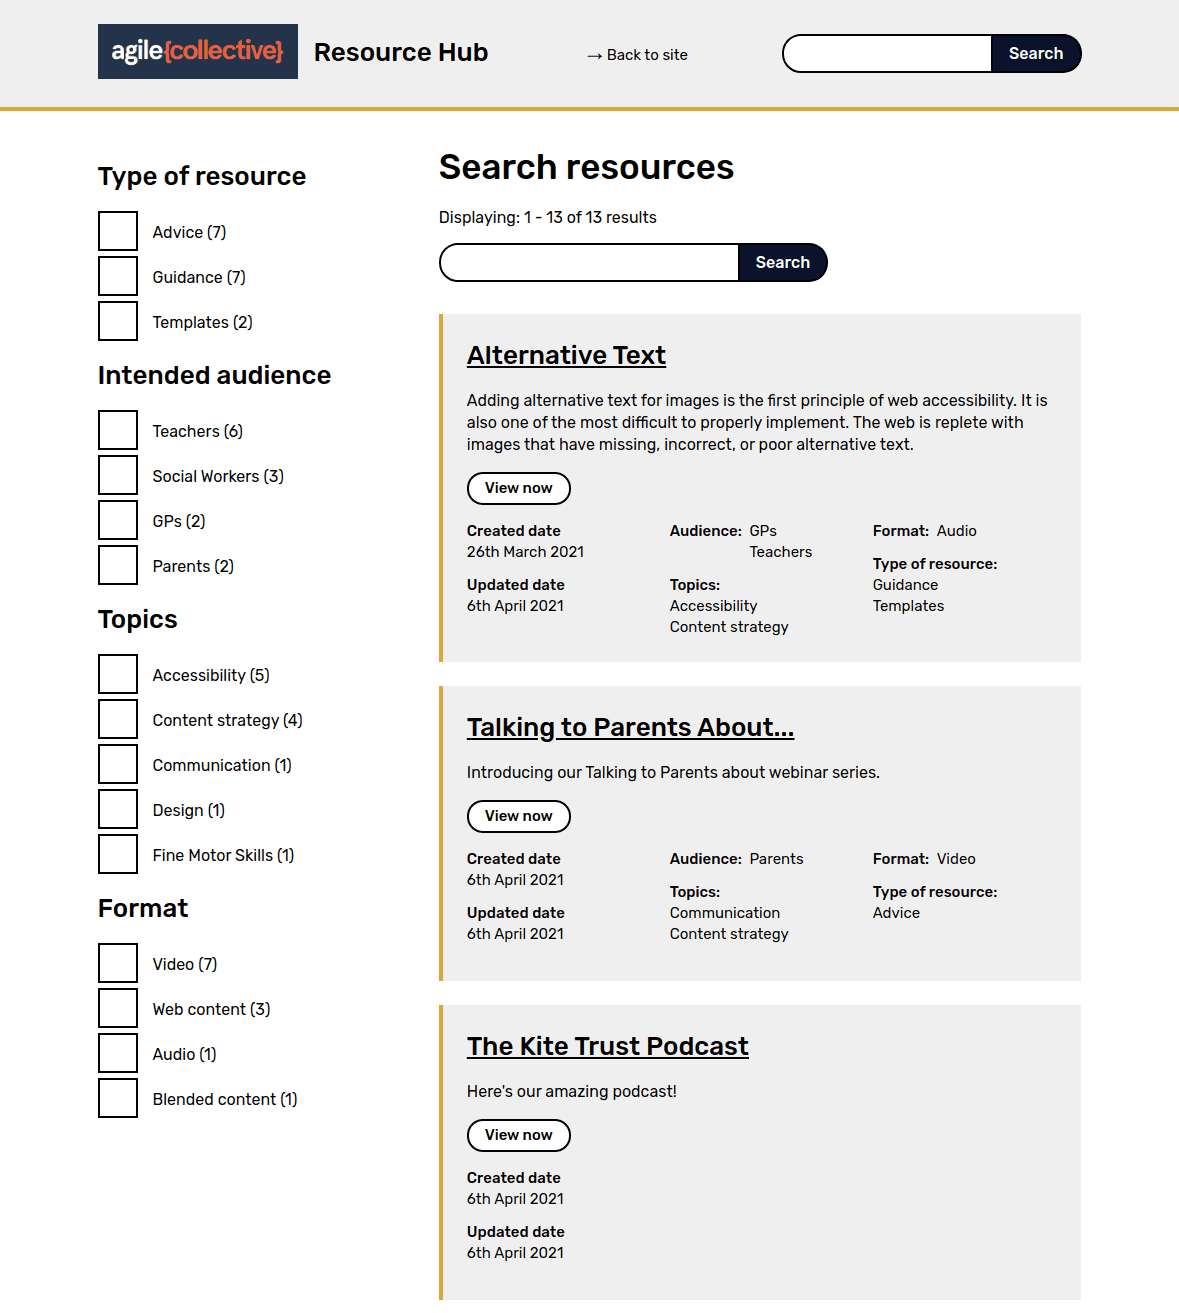 Resource Hub's newly implemented front end